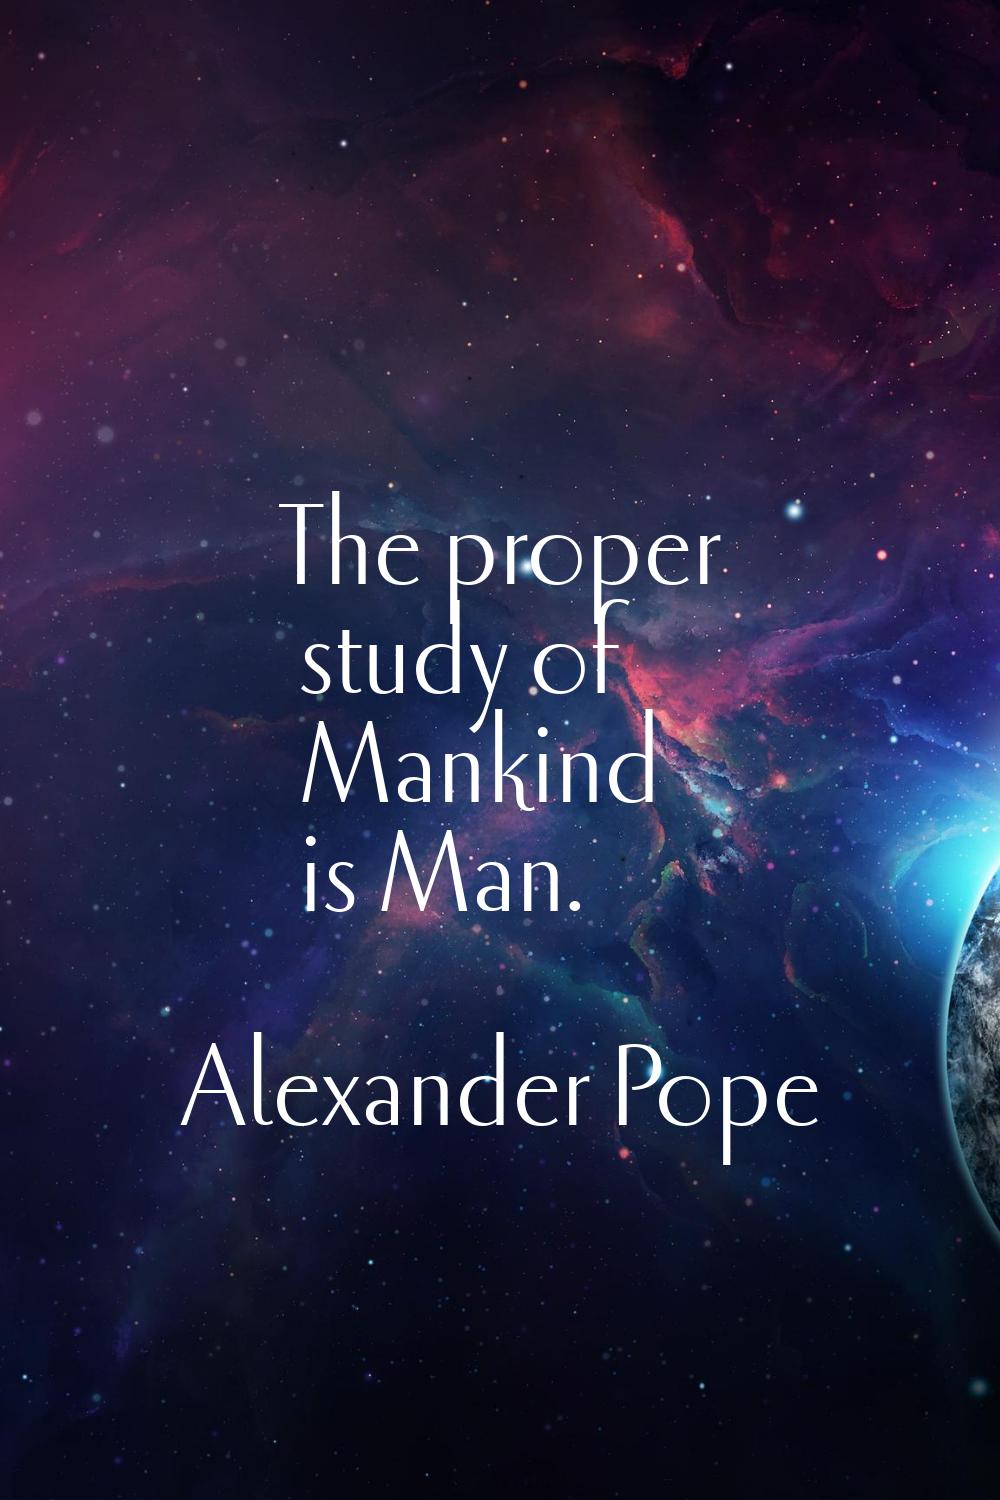 The proper study of Mankind is Man.